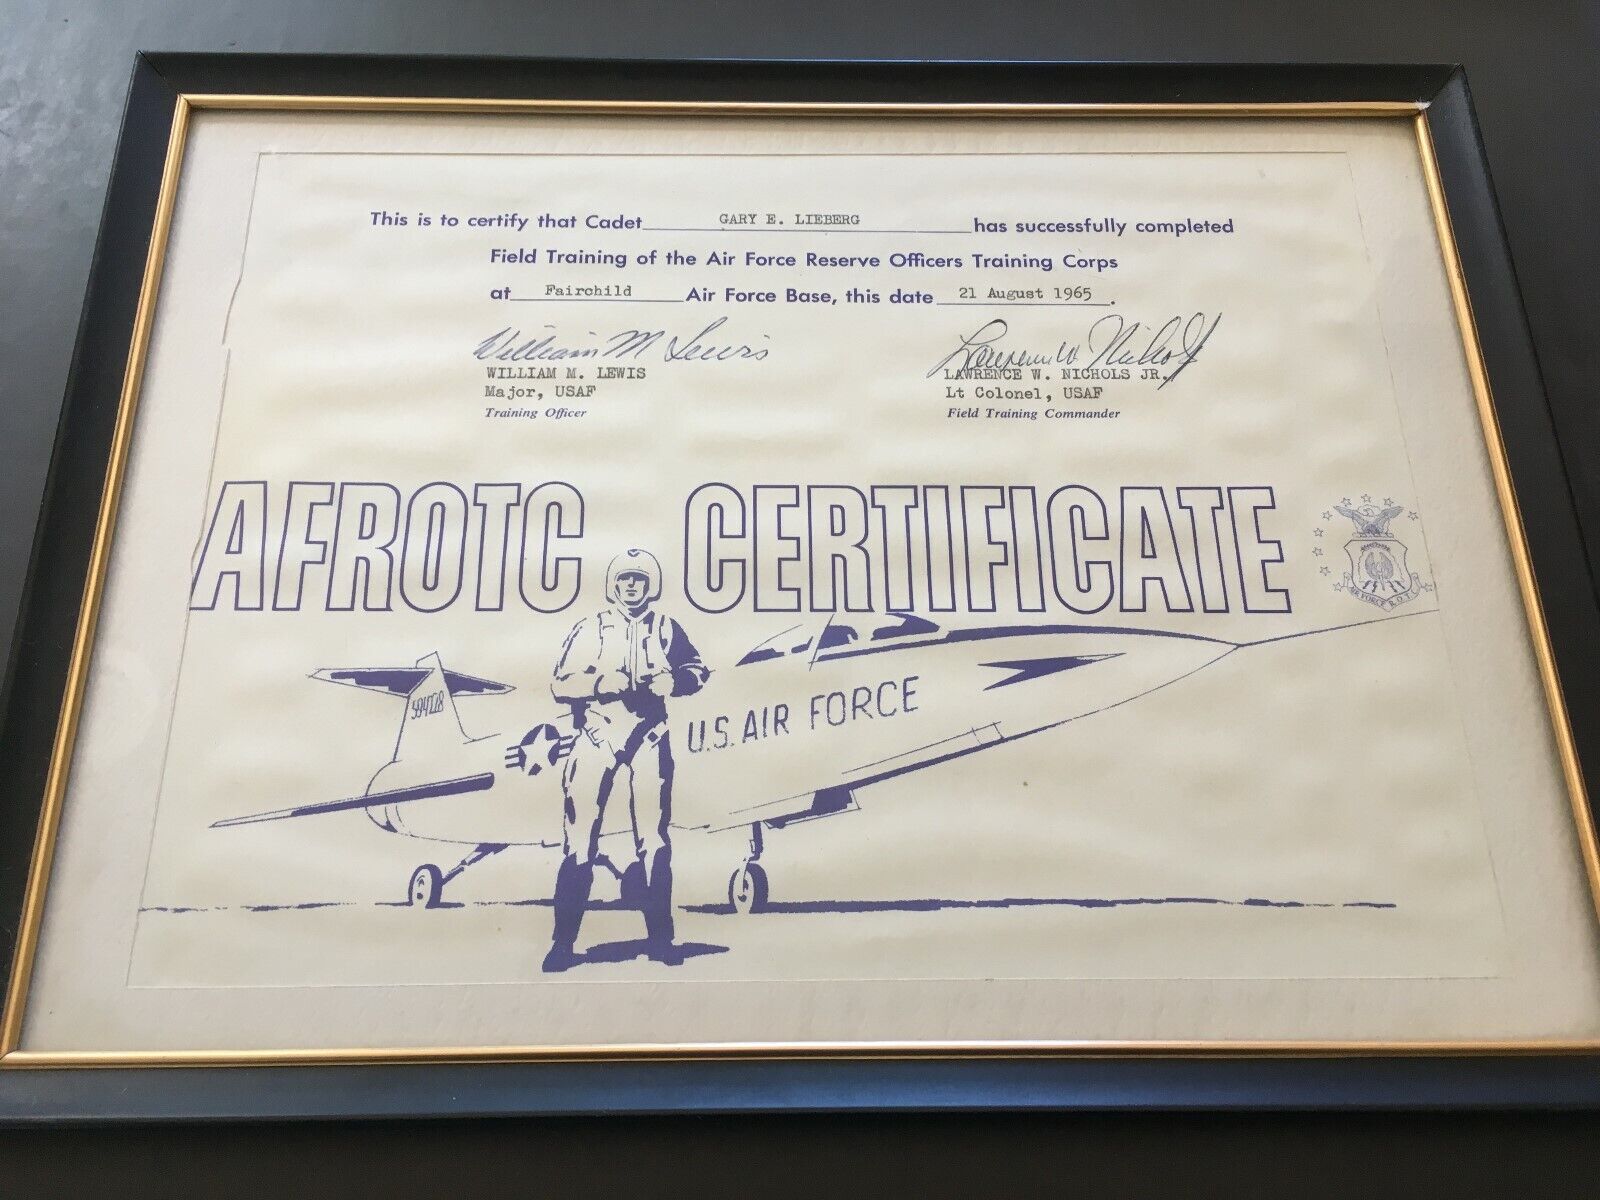 VINTAGE U.S. Air Force AFROTC Field Training Certificate Fairchild 1965 signed